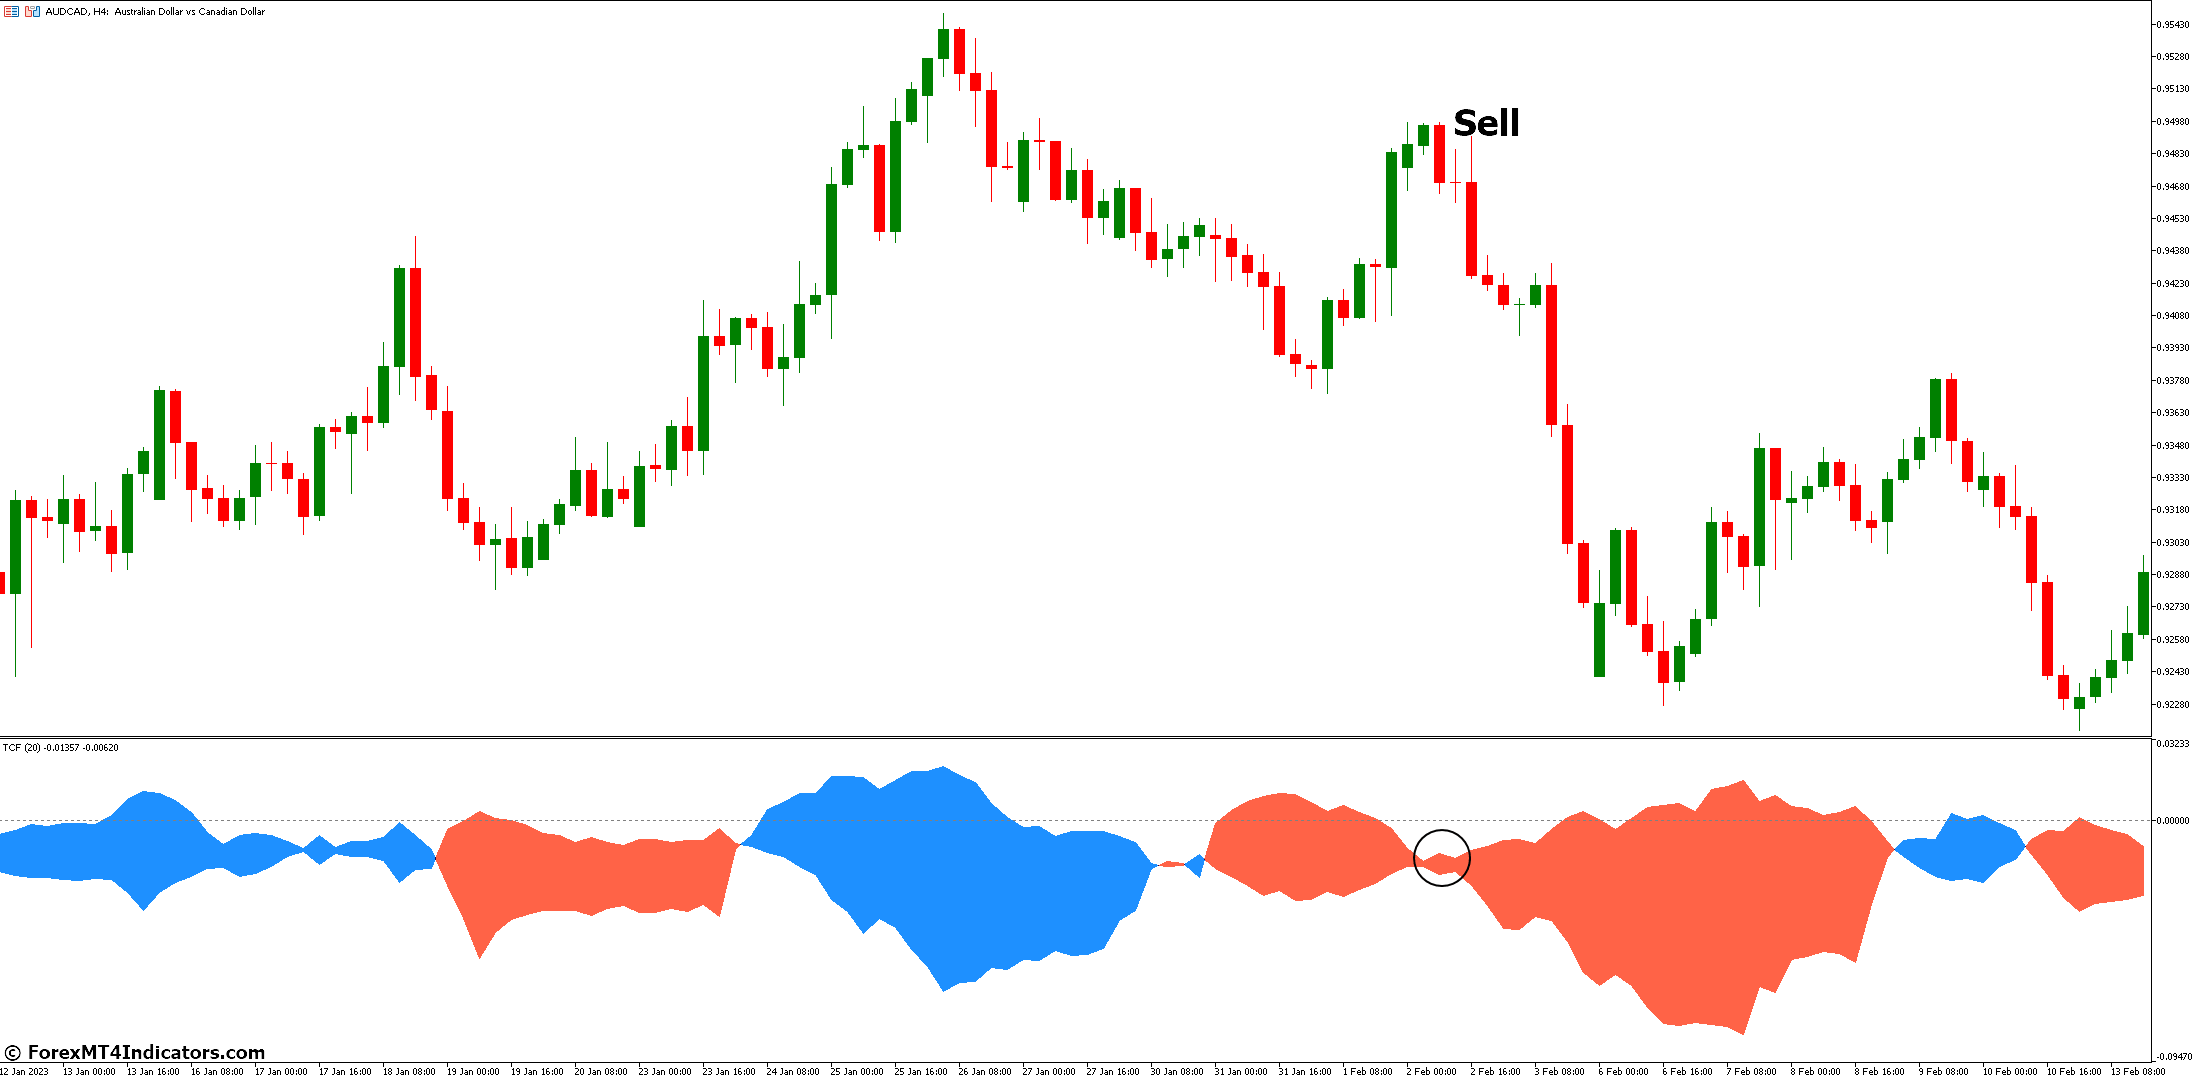 How to Trade with Trend Continuation Factor Indicator - Sell Entry